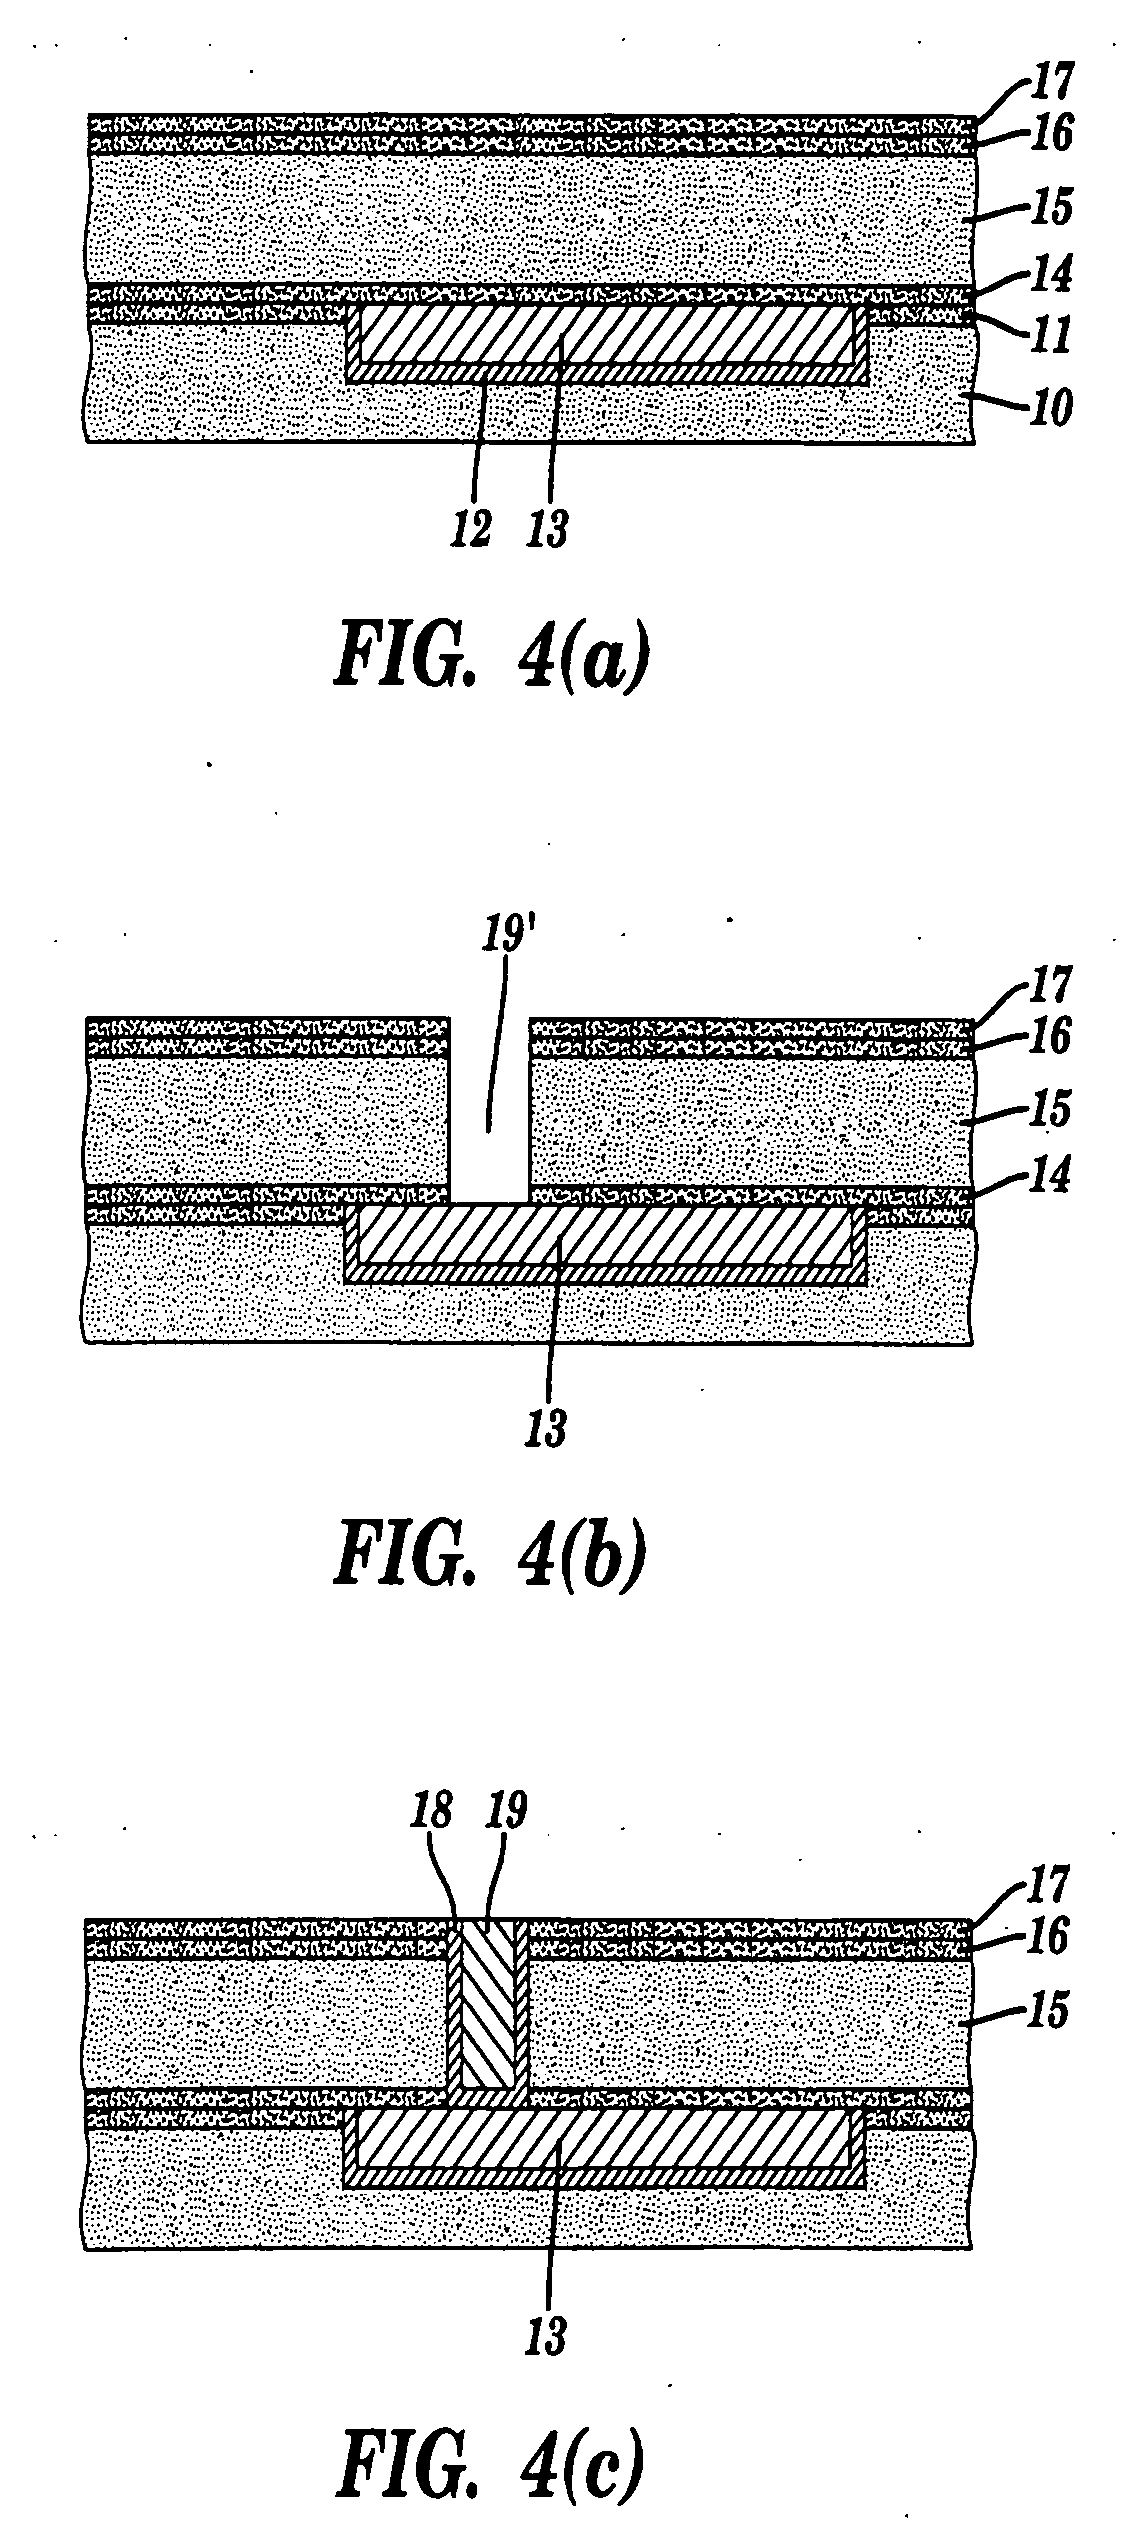 Dual damascene interconnect structures having different materials for line and via conductors